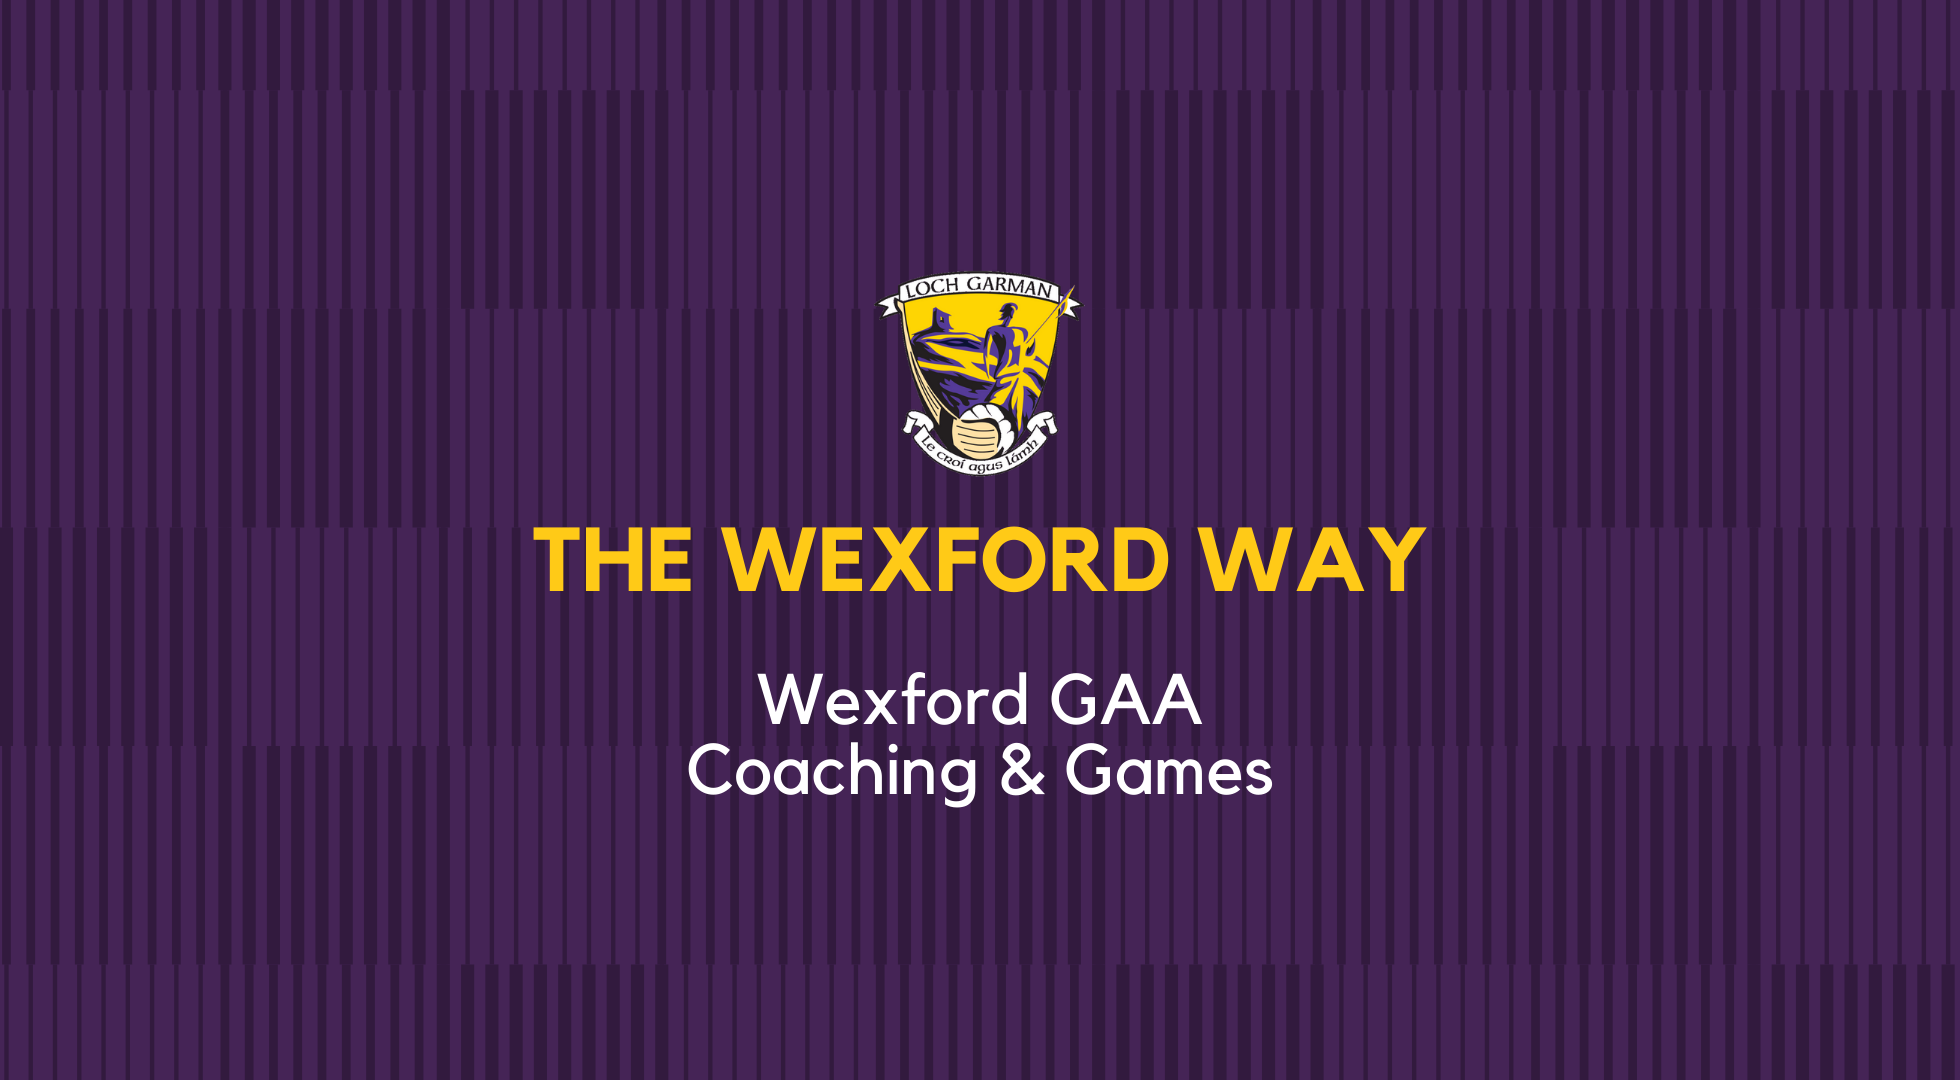 The Wexford Way